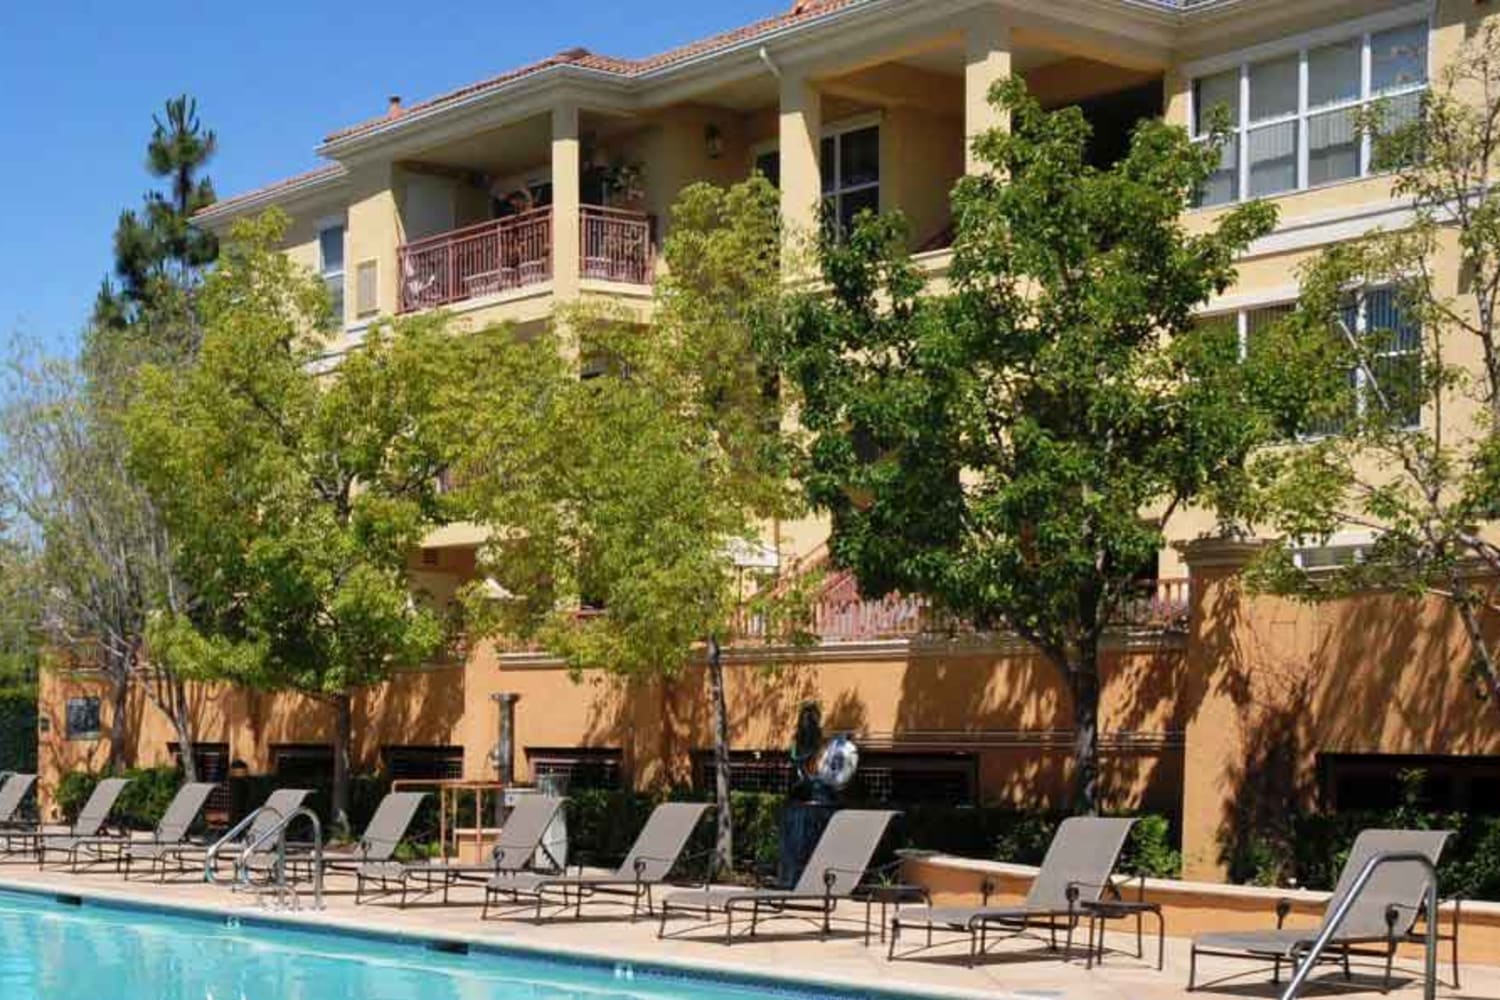 Enjoy a swimming pool with lounge chairs at The Carlyle in Santa Clara, California